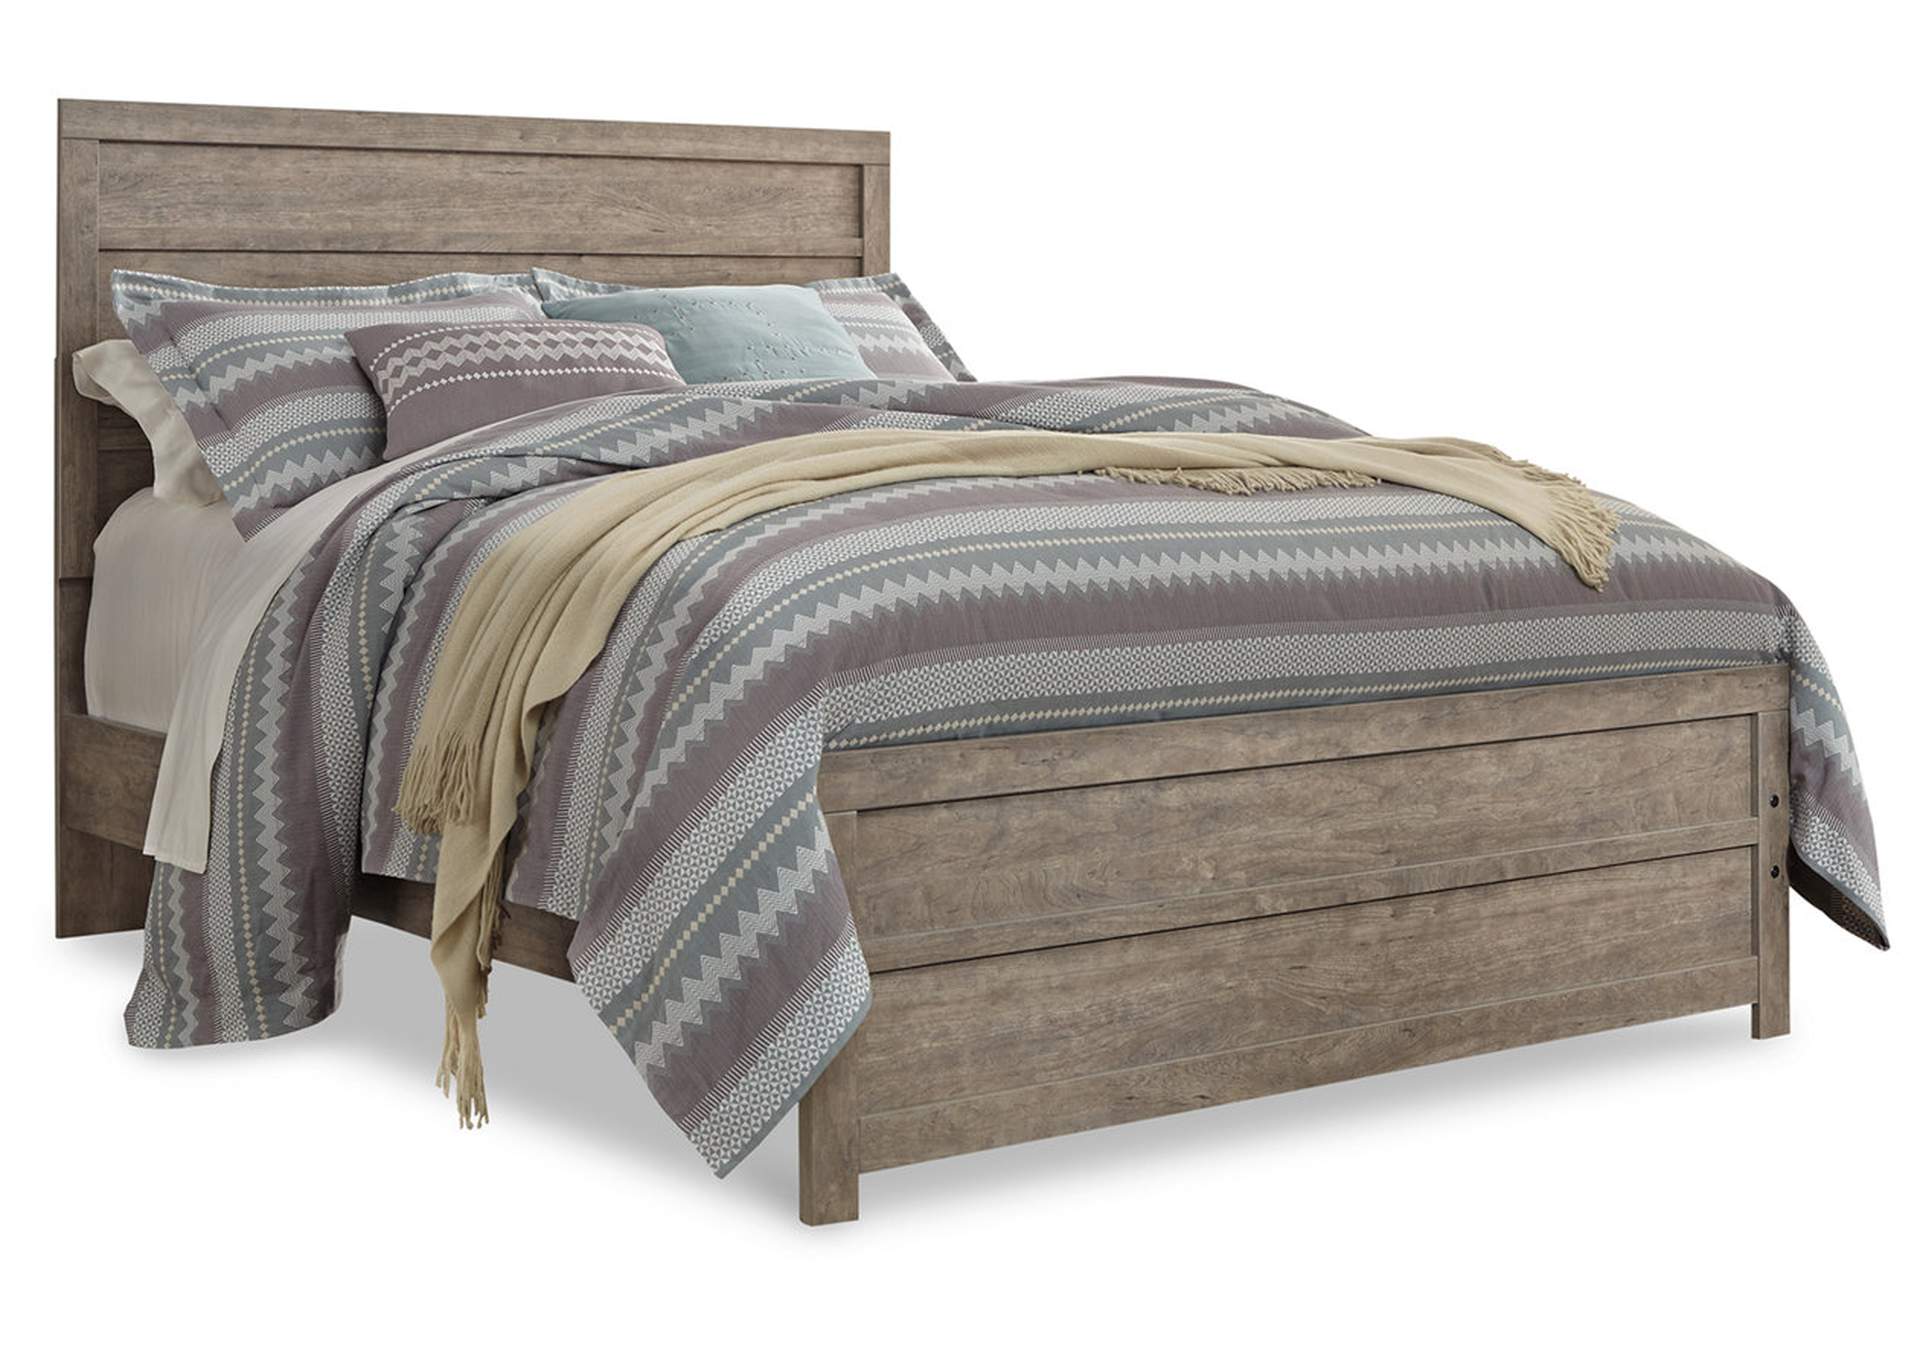 Culverbach Queen Panel Bed,Signature Design By Ashley